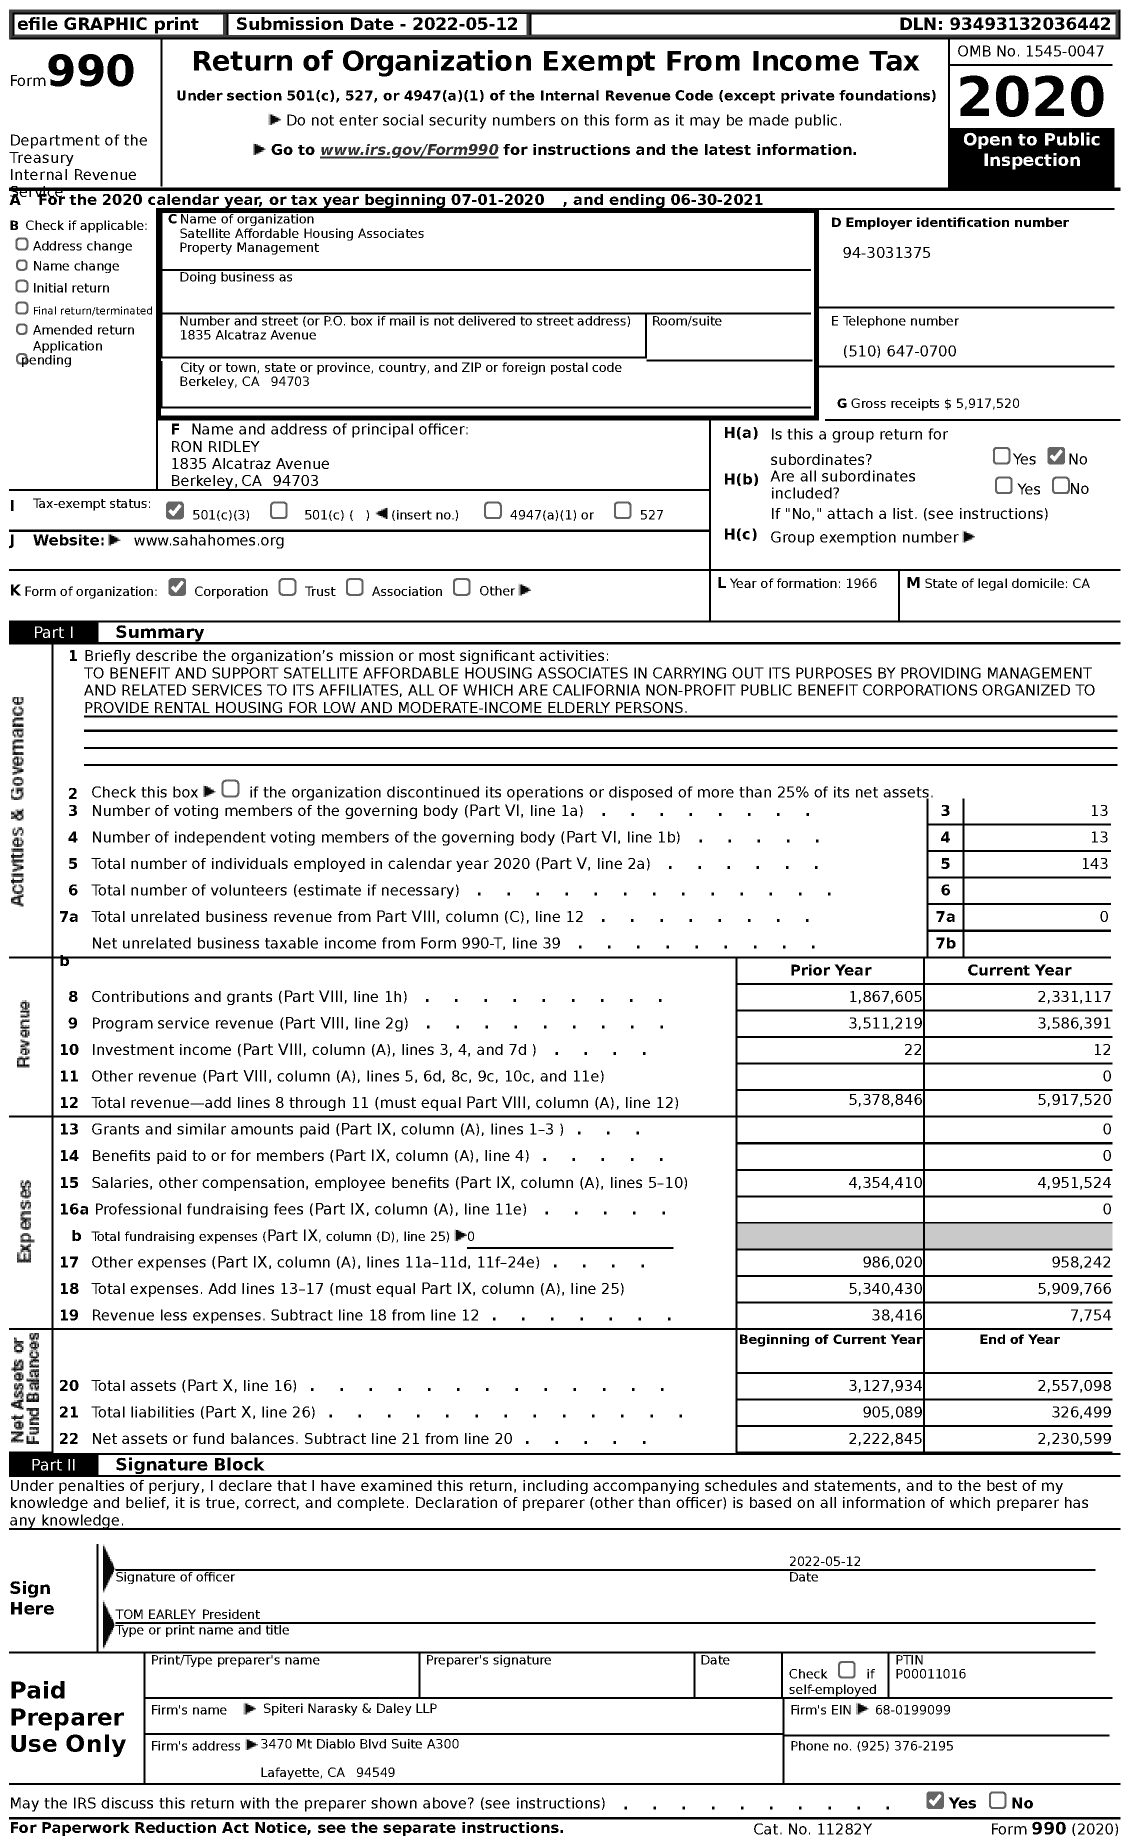 Image of first page of 2020 Form 990 for Satellite Affordable Housing Associates Property Management (SAHA)